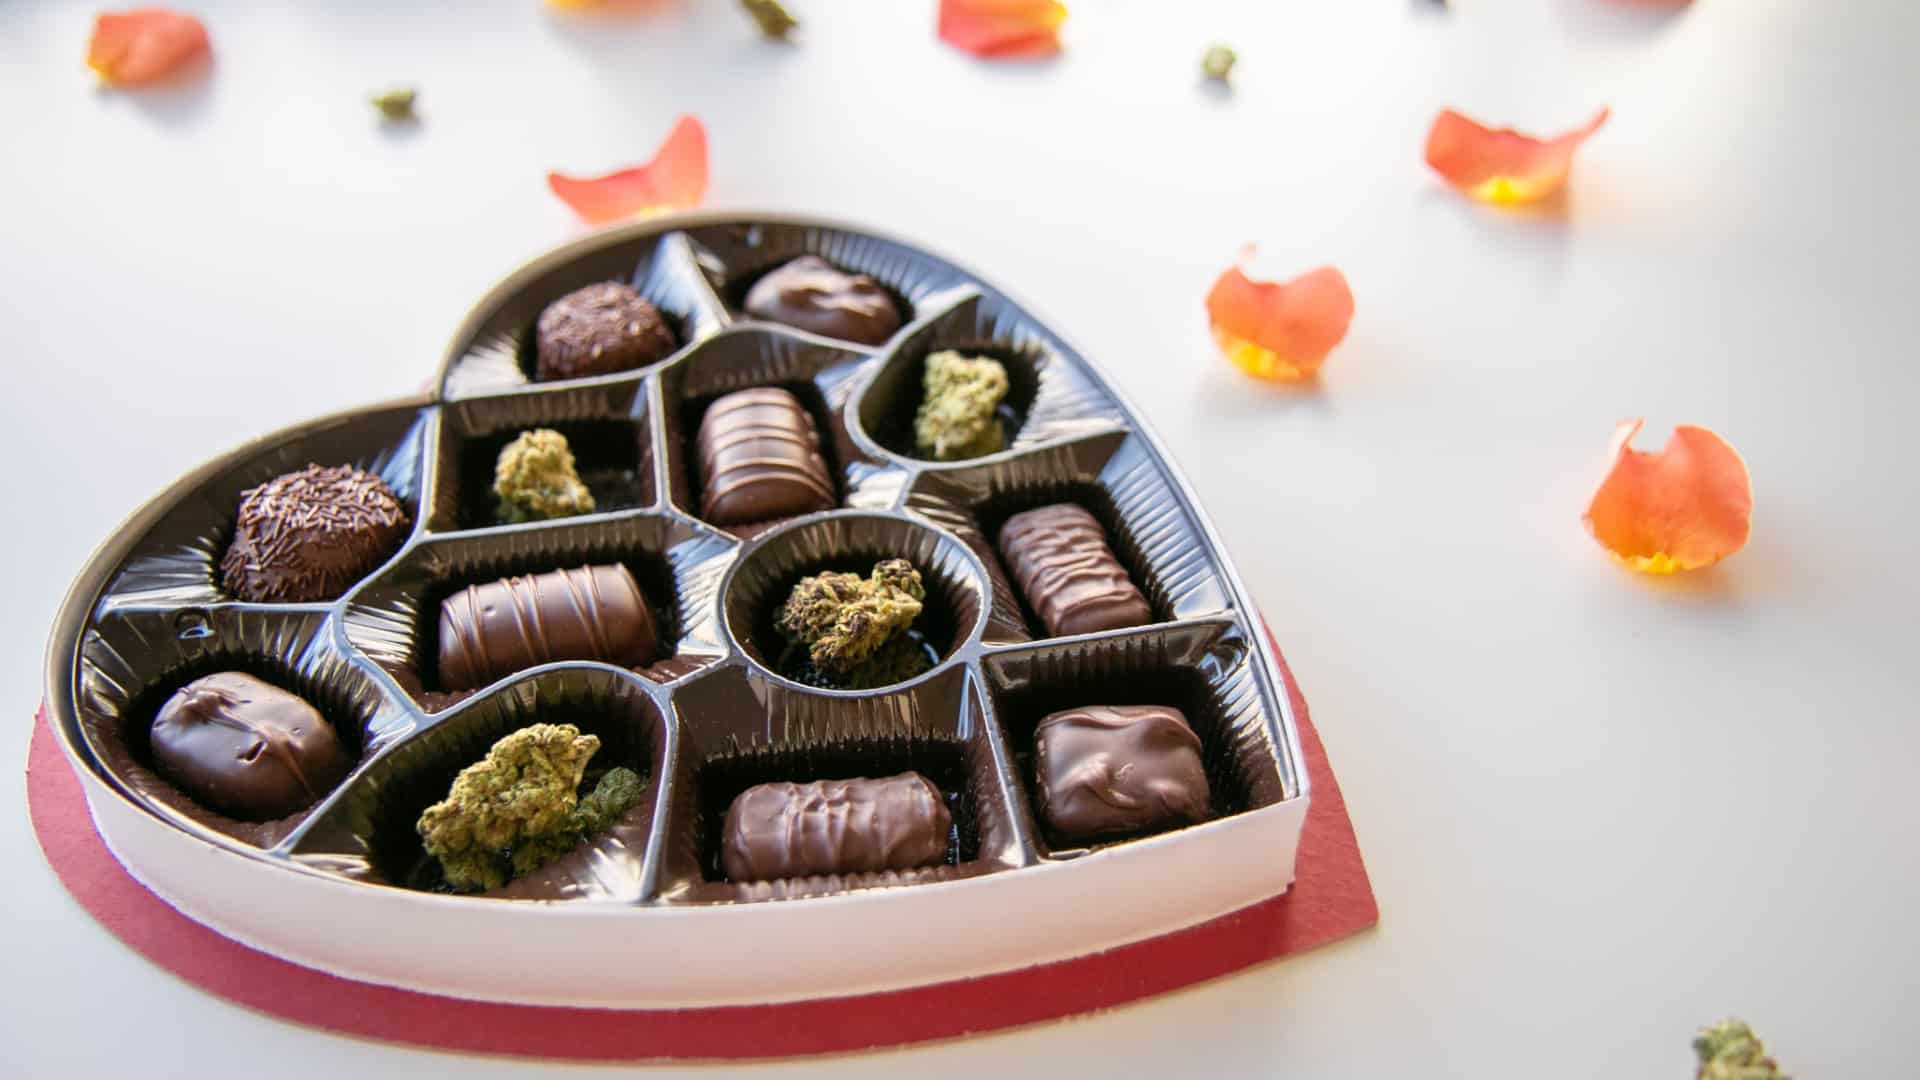 Cannabinthusiast | Cupid Approved Cannabis Gifts for Valentine’s Day - Cannabis Valentines Day